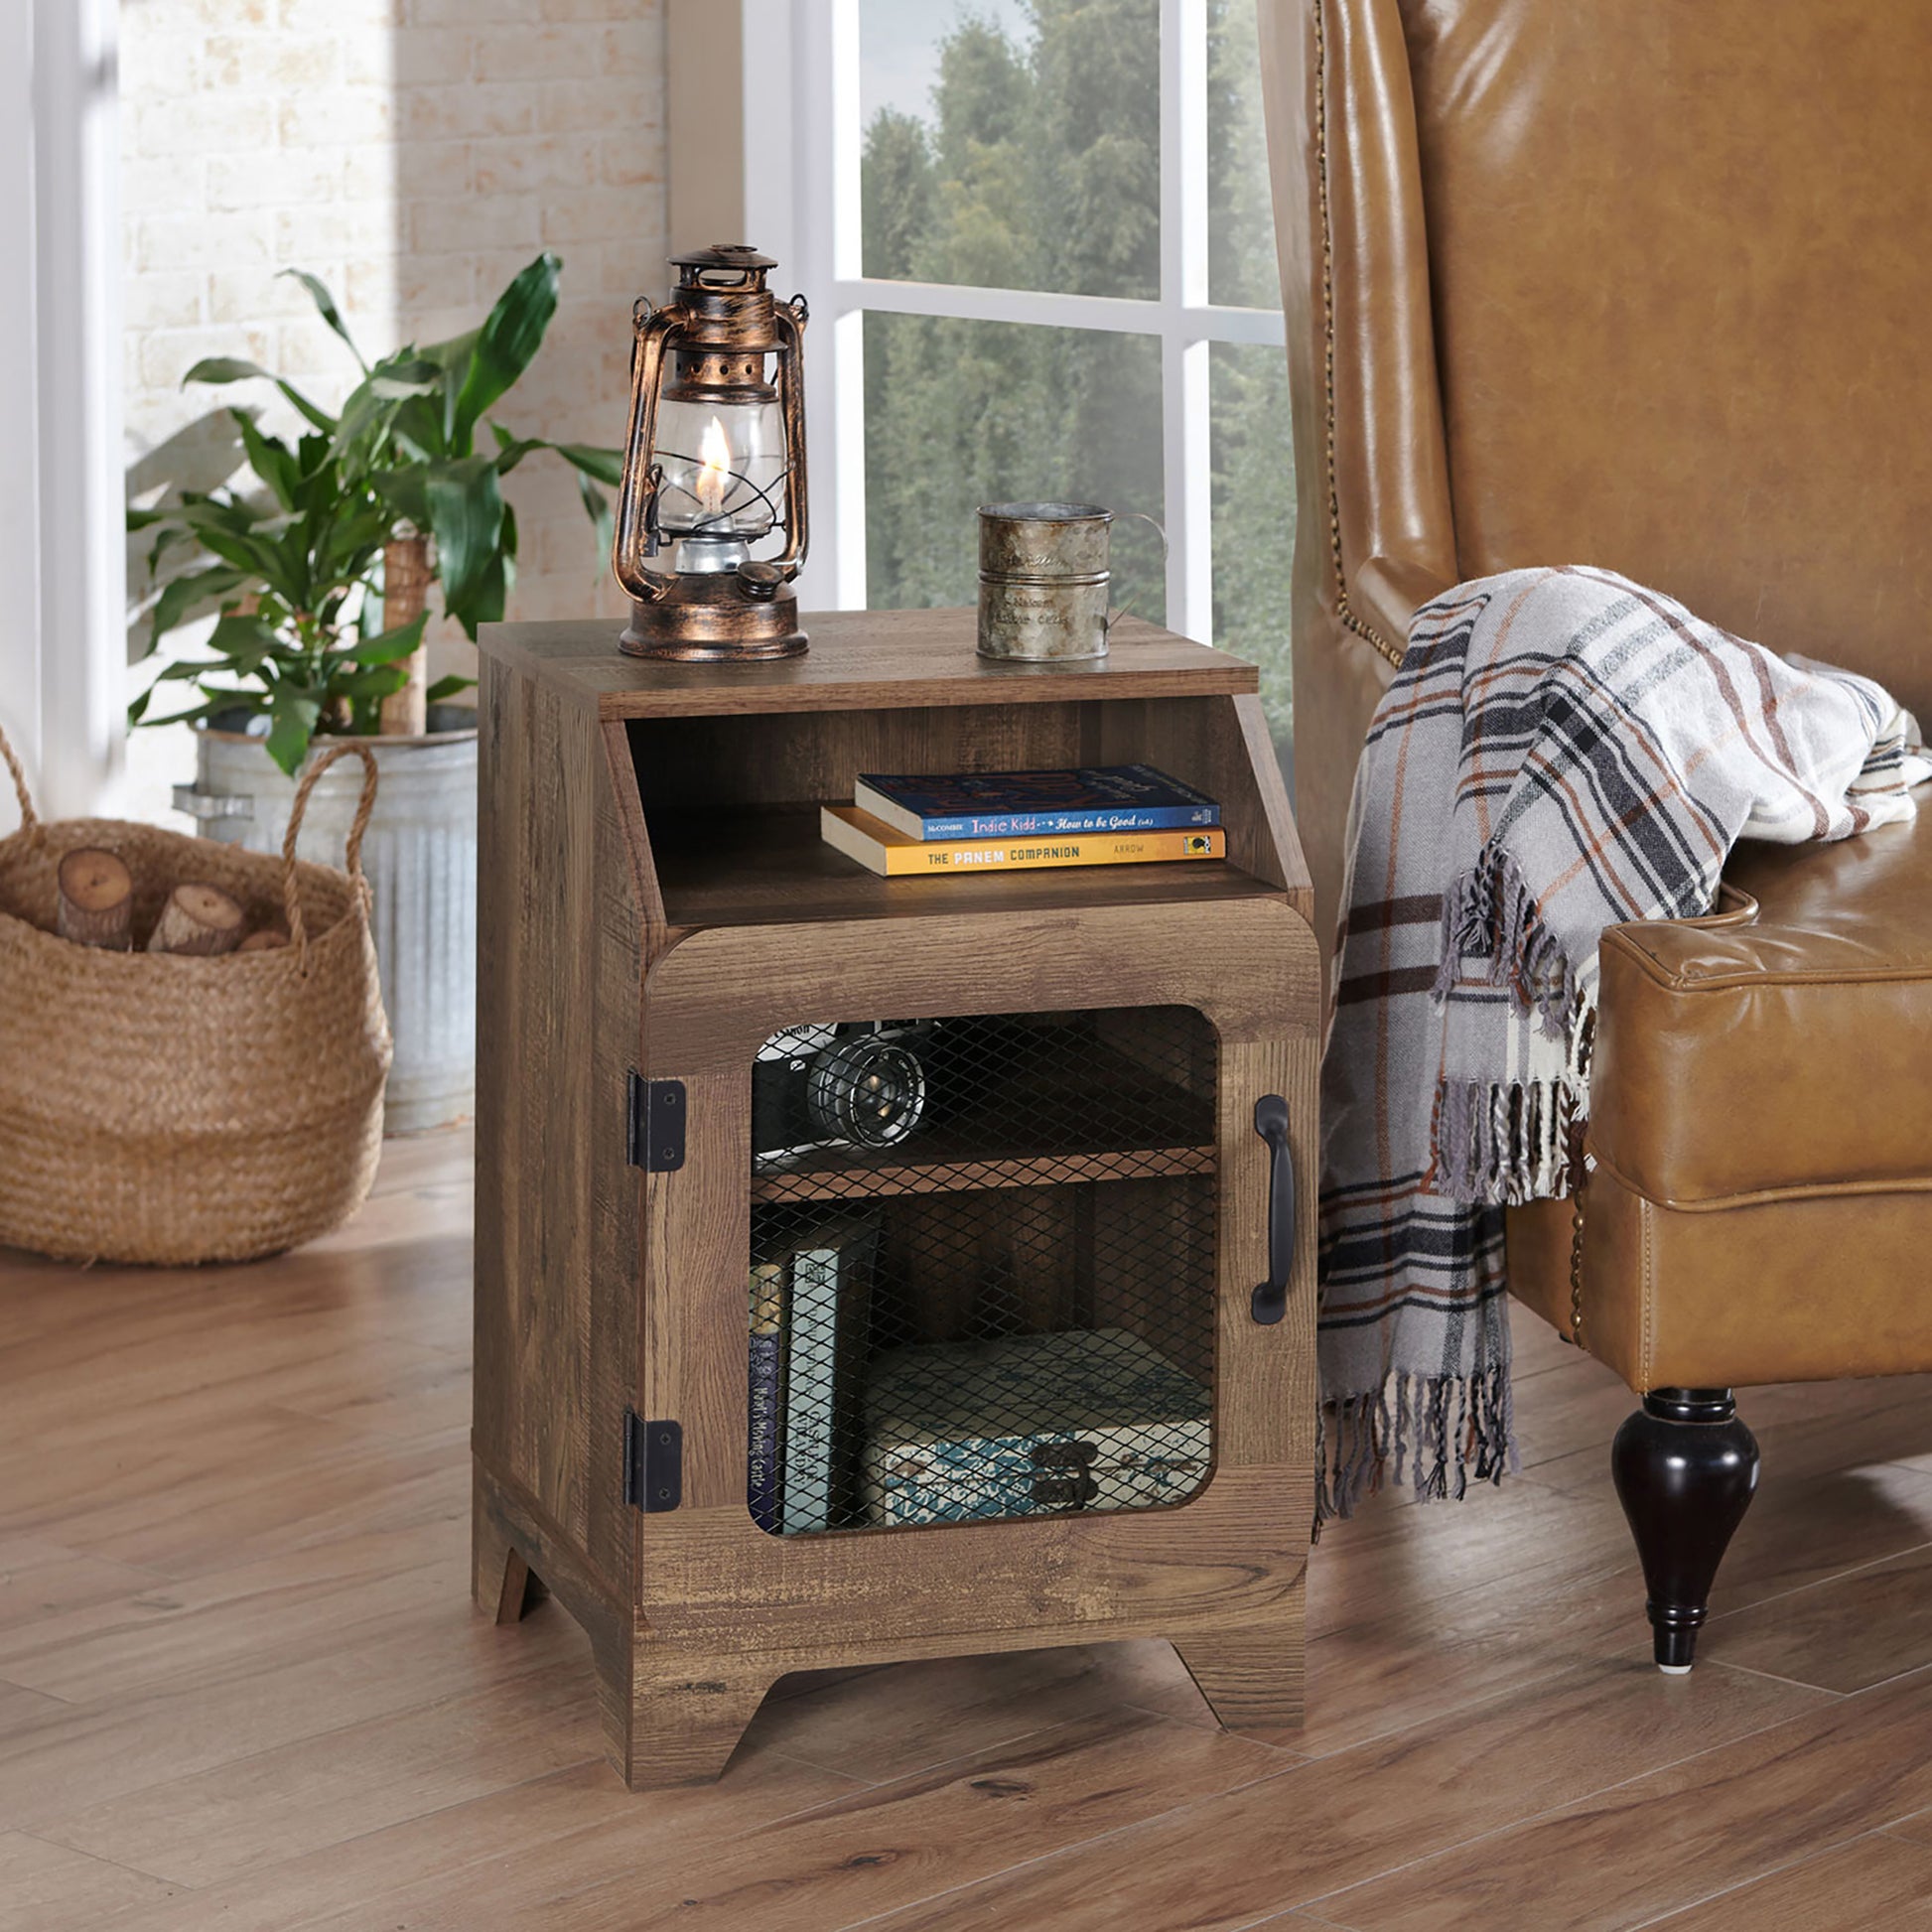 Right angled rustic reclaimed oak three-shelf end table with a metal mesh door in a living room with accessories